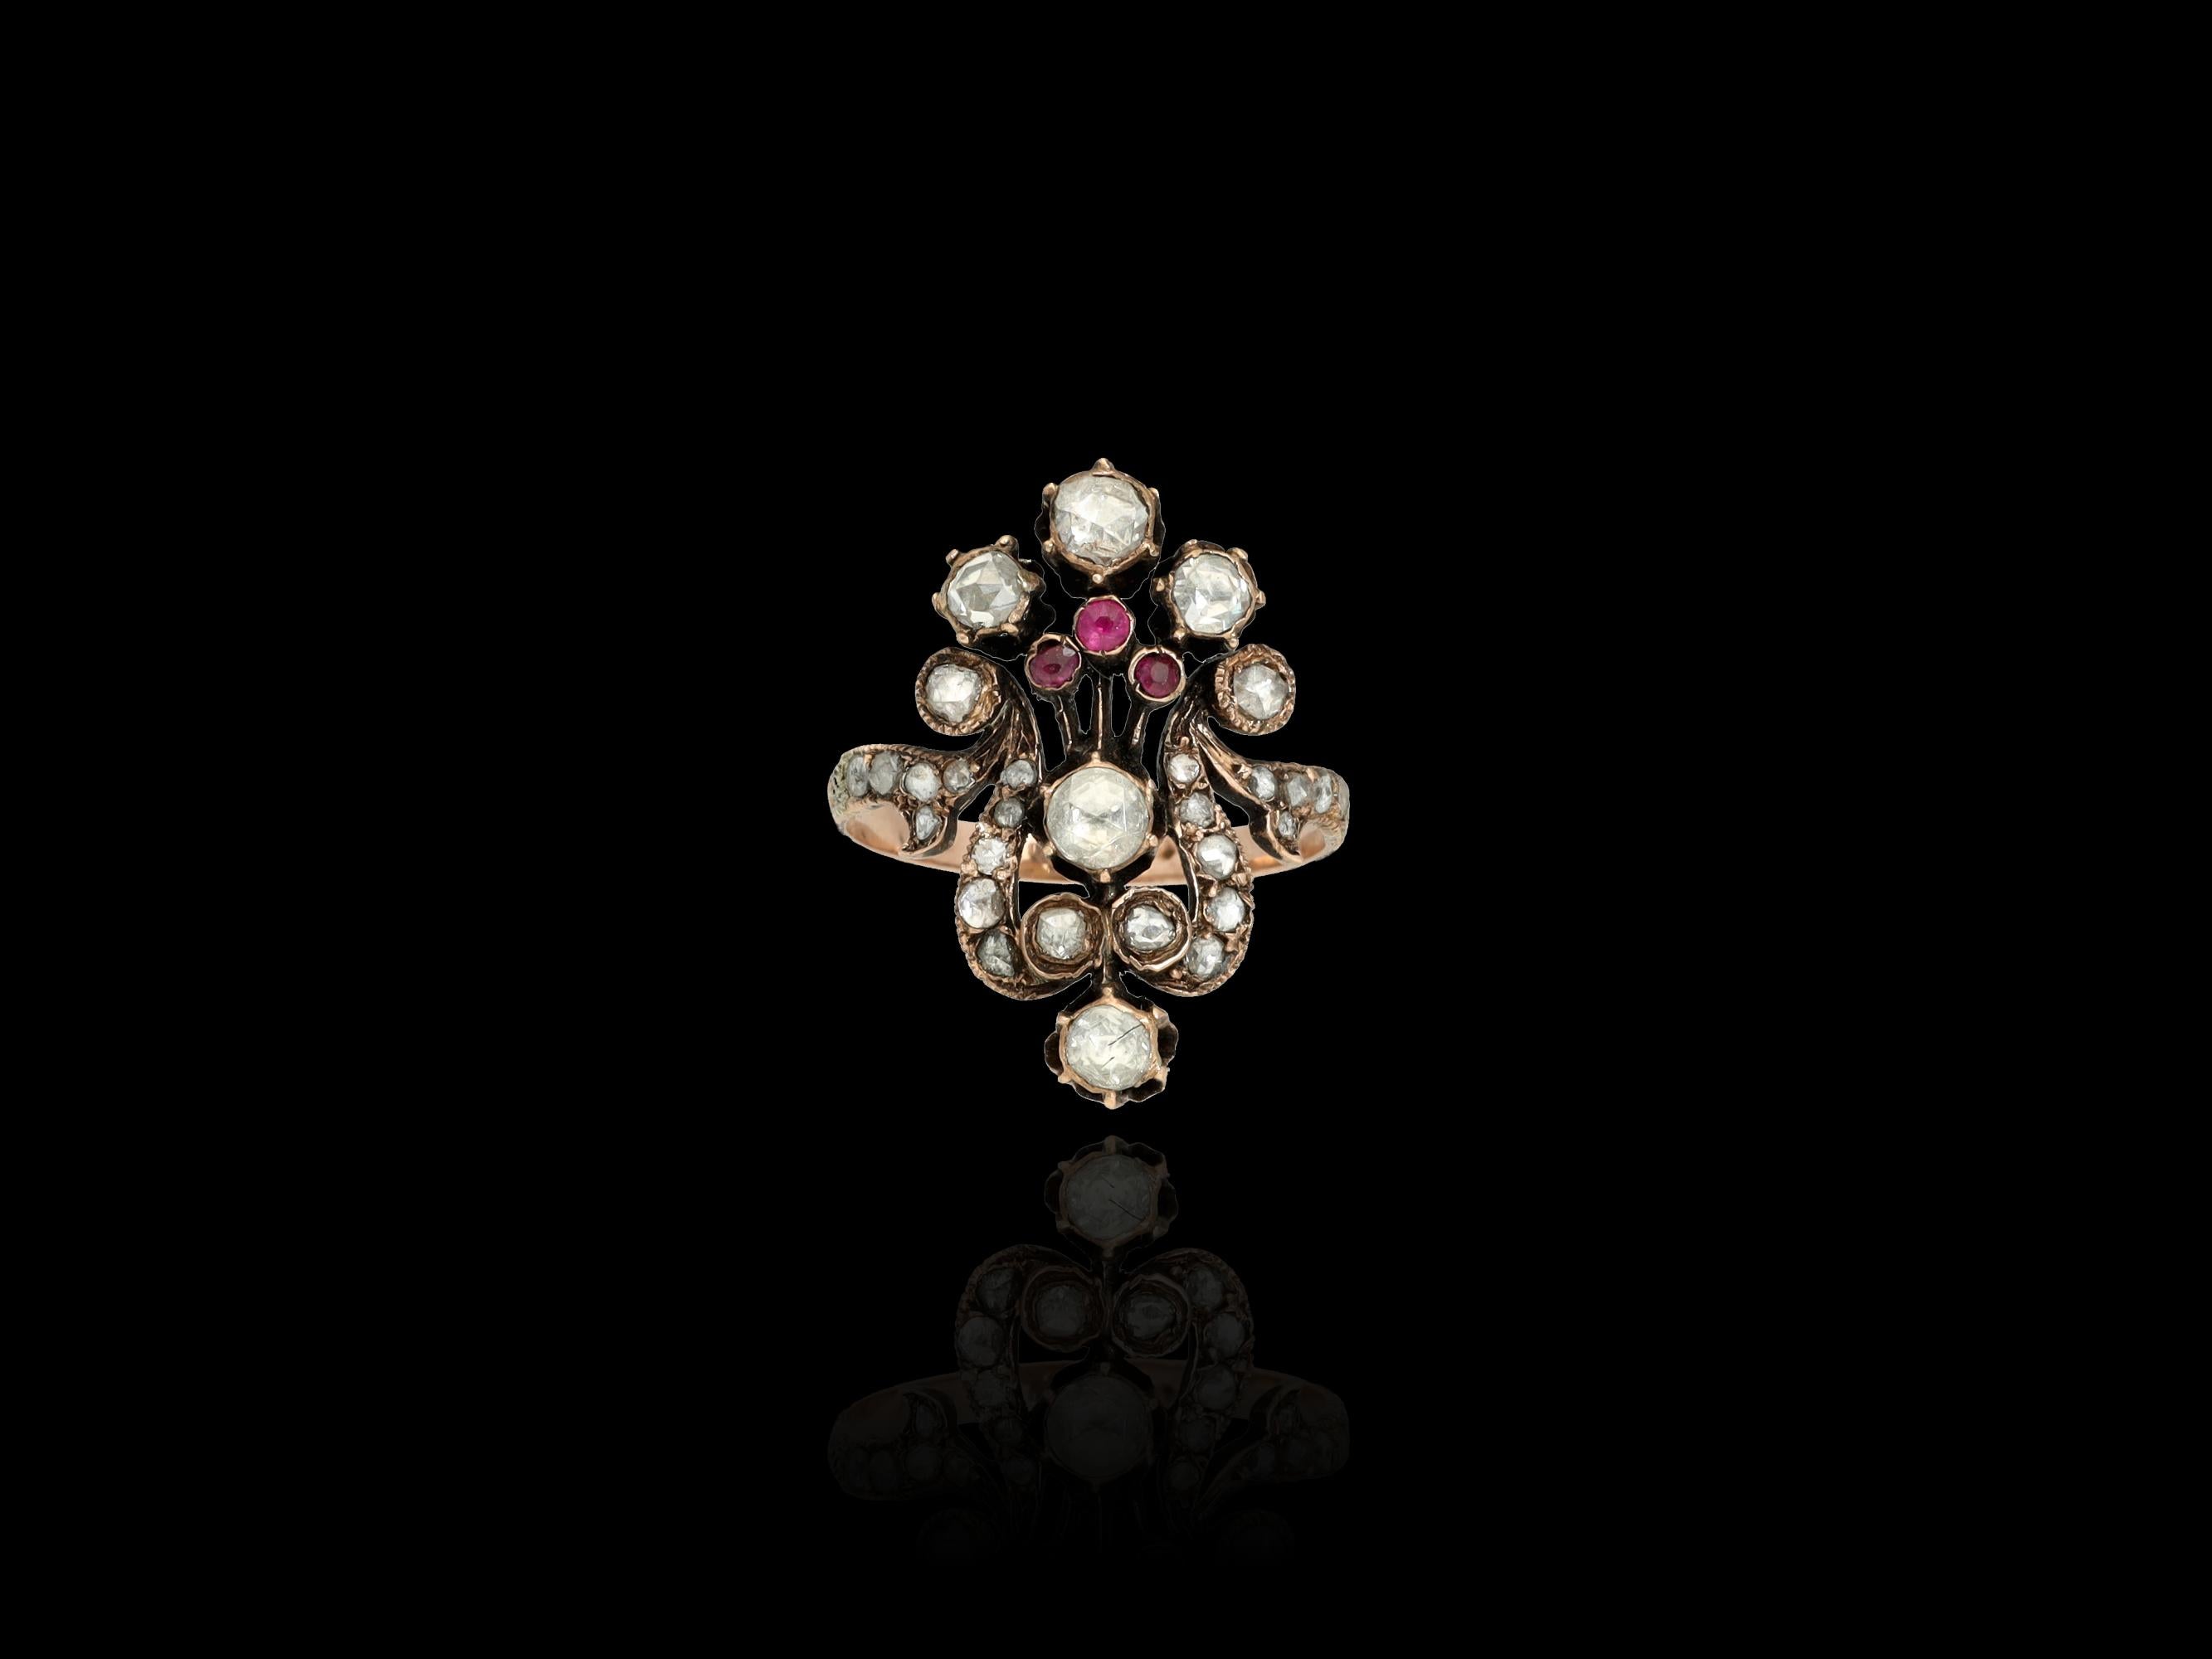 A head-turning antique Victorian diamond and ruby giardinetti ring! Giardinetti stands for “little garden” is one of the most romantic historic ring setting styles that symbolizes a floral arrangement. It was widely popular in 17 -19th century